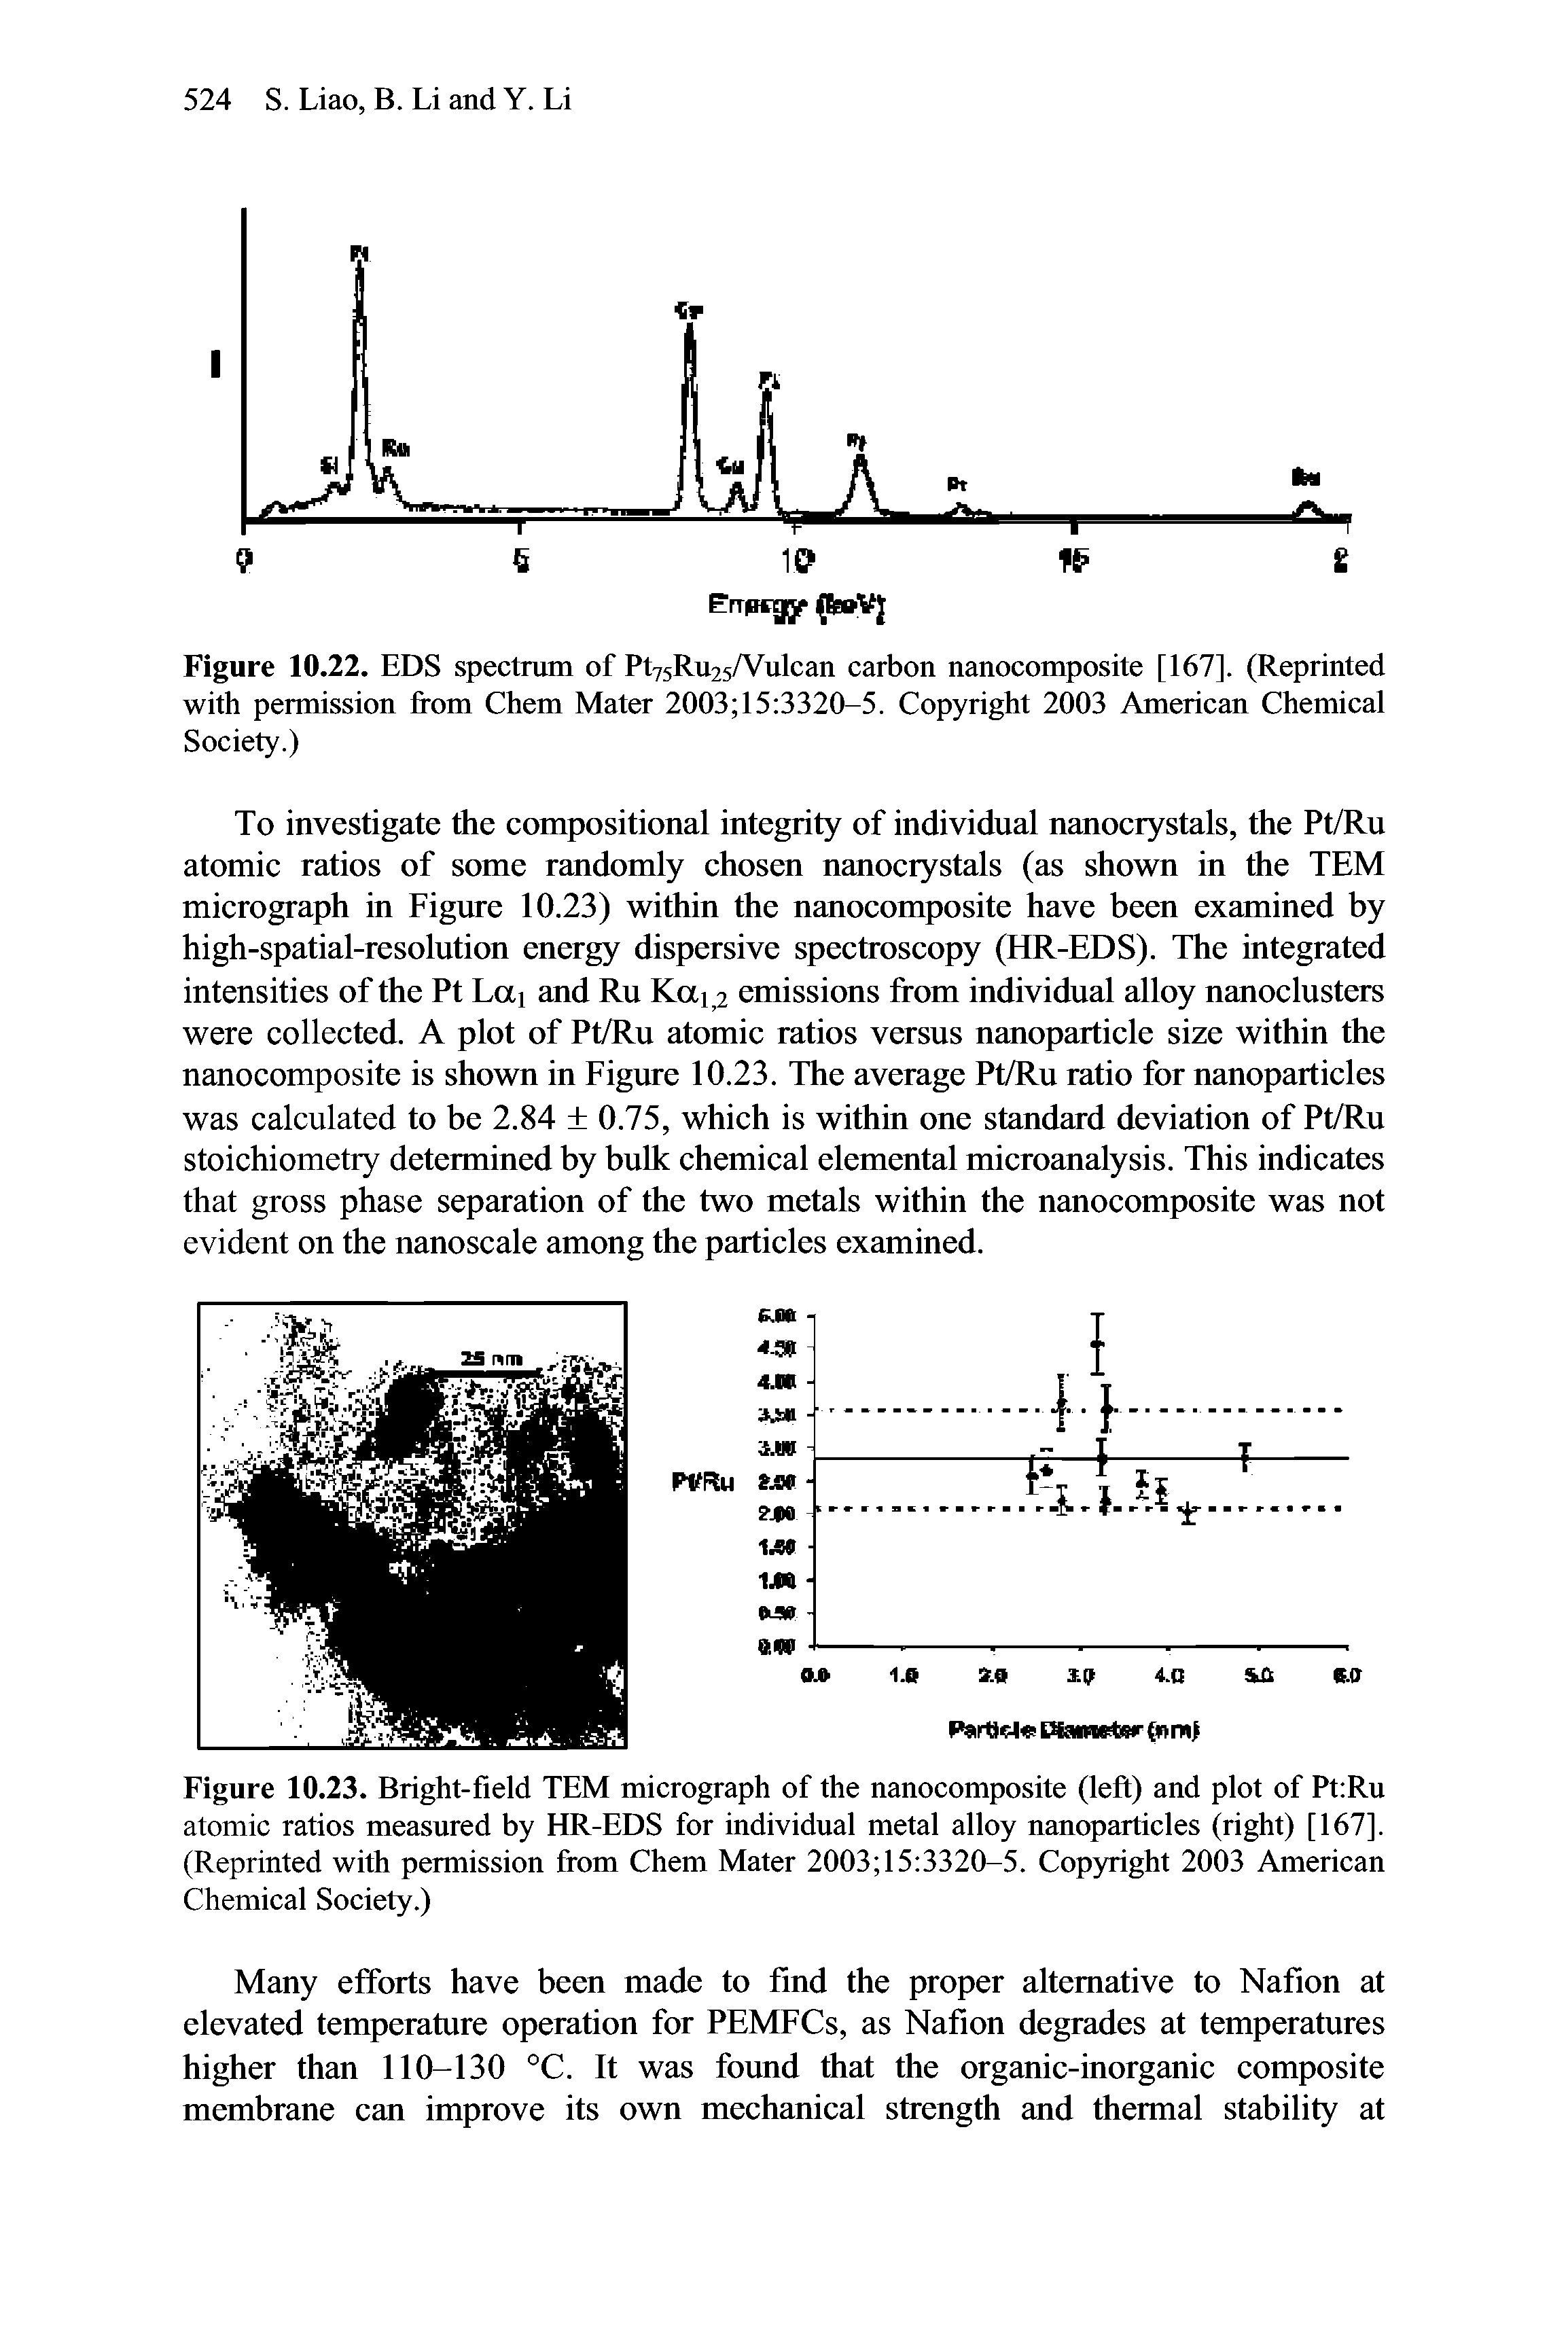 Figure 10.23. Bright-field TEM micrograph of the nanocomposite (left) and plot of Pt Ru atomic ratios measured by HR-EDS for individual metal alloy nanoparticles (right) [167]. (Reprinted with permission from Chem Mater 2003 15 3320-5. Copyright 2003 American Chemical Society.)...